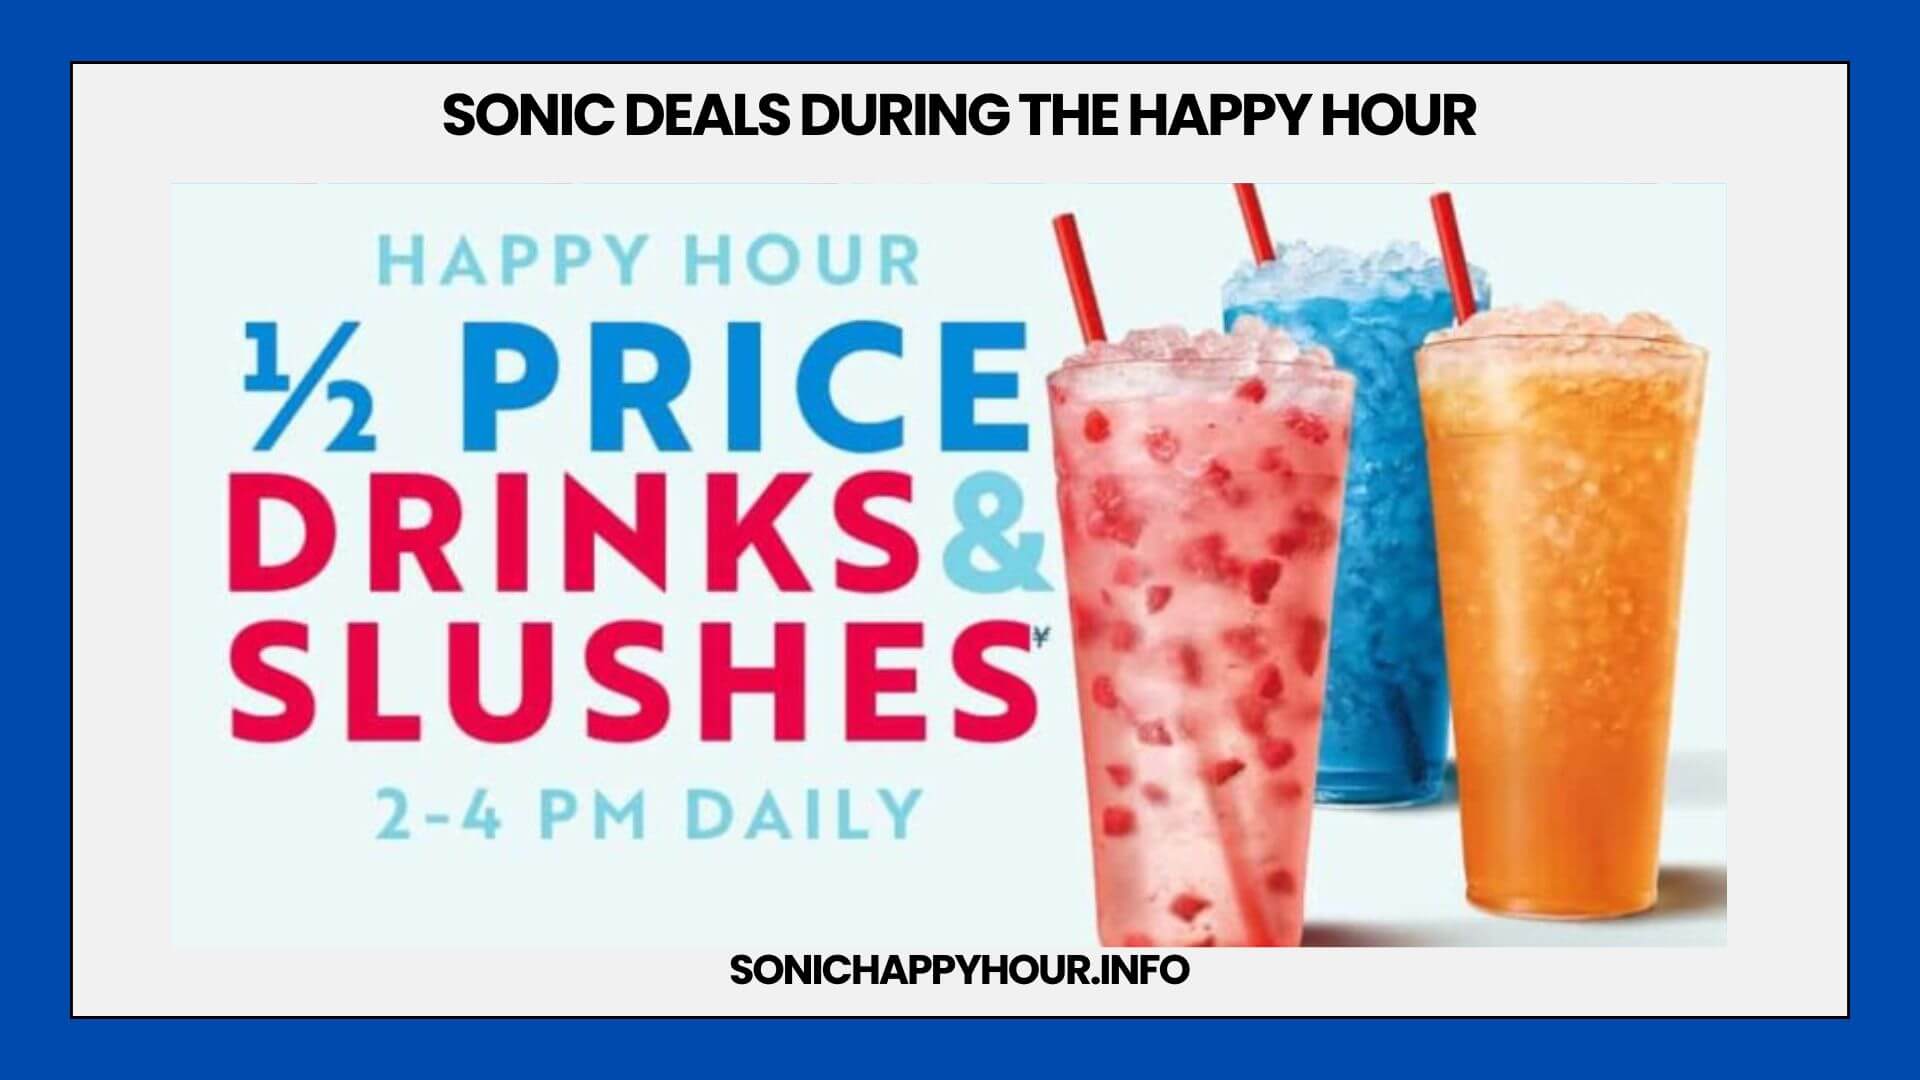 Sonic Deals During the Happy Hour